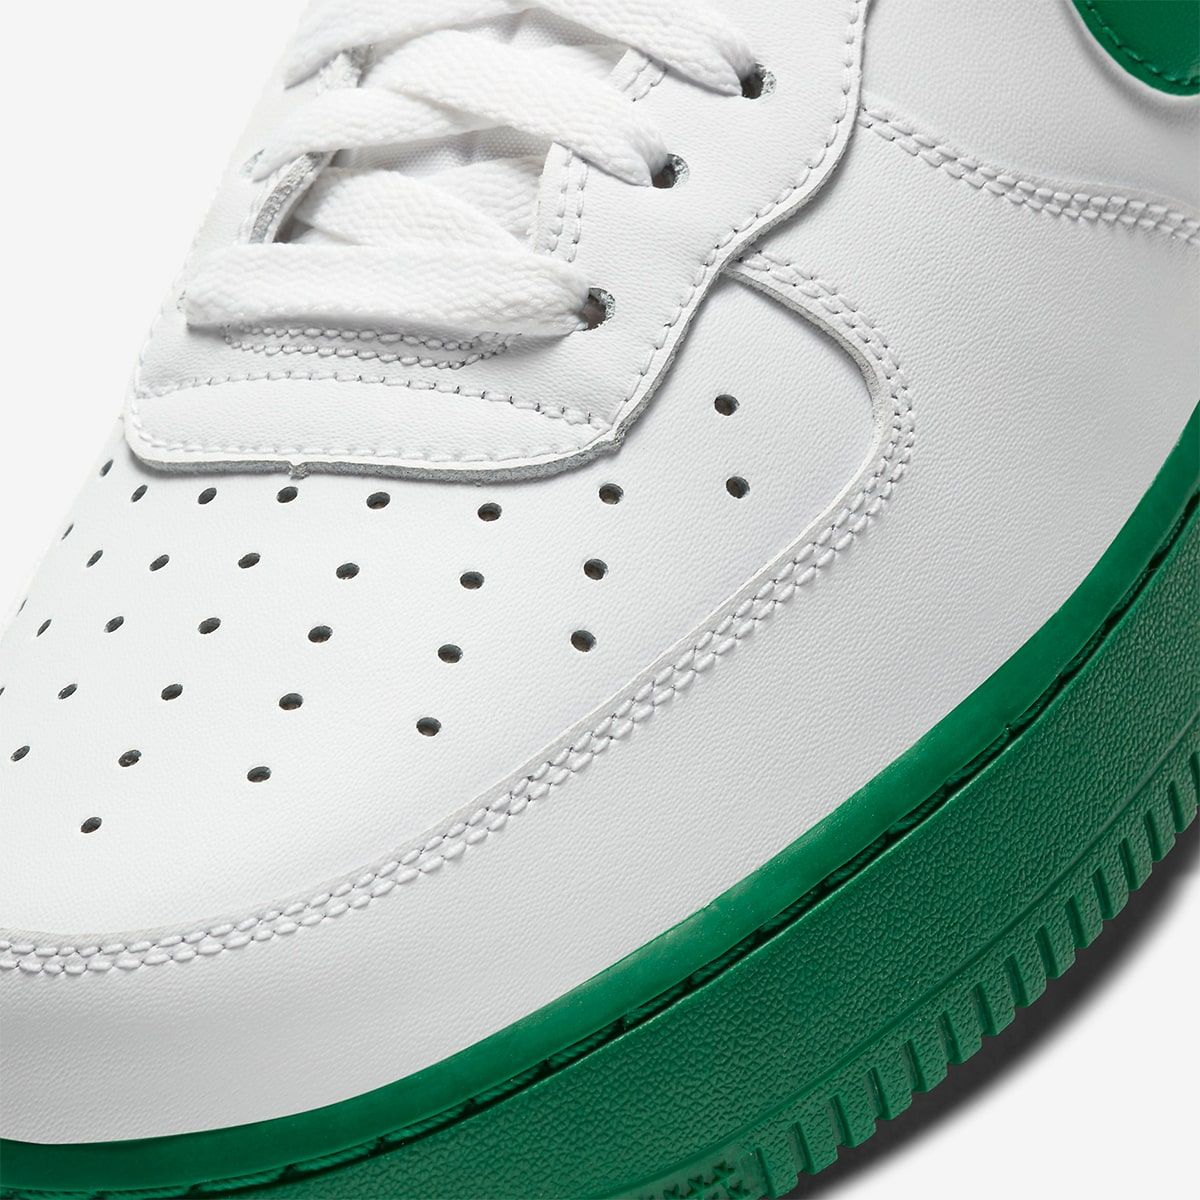 The Nike Air Force 1 High Gears-Up in Green for Fall | HOUSE OF HEAT